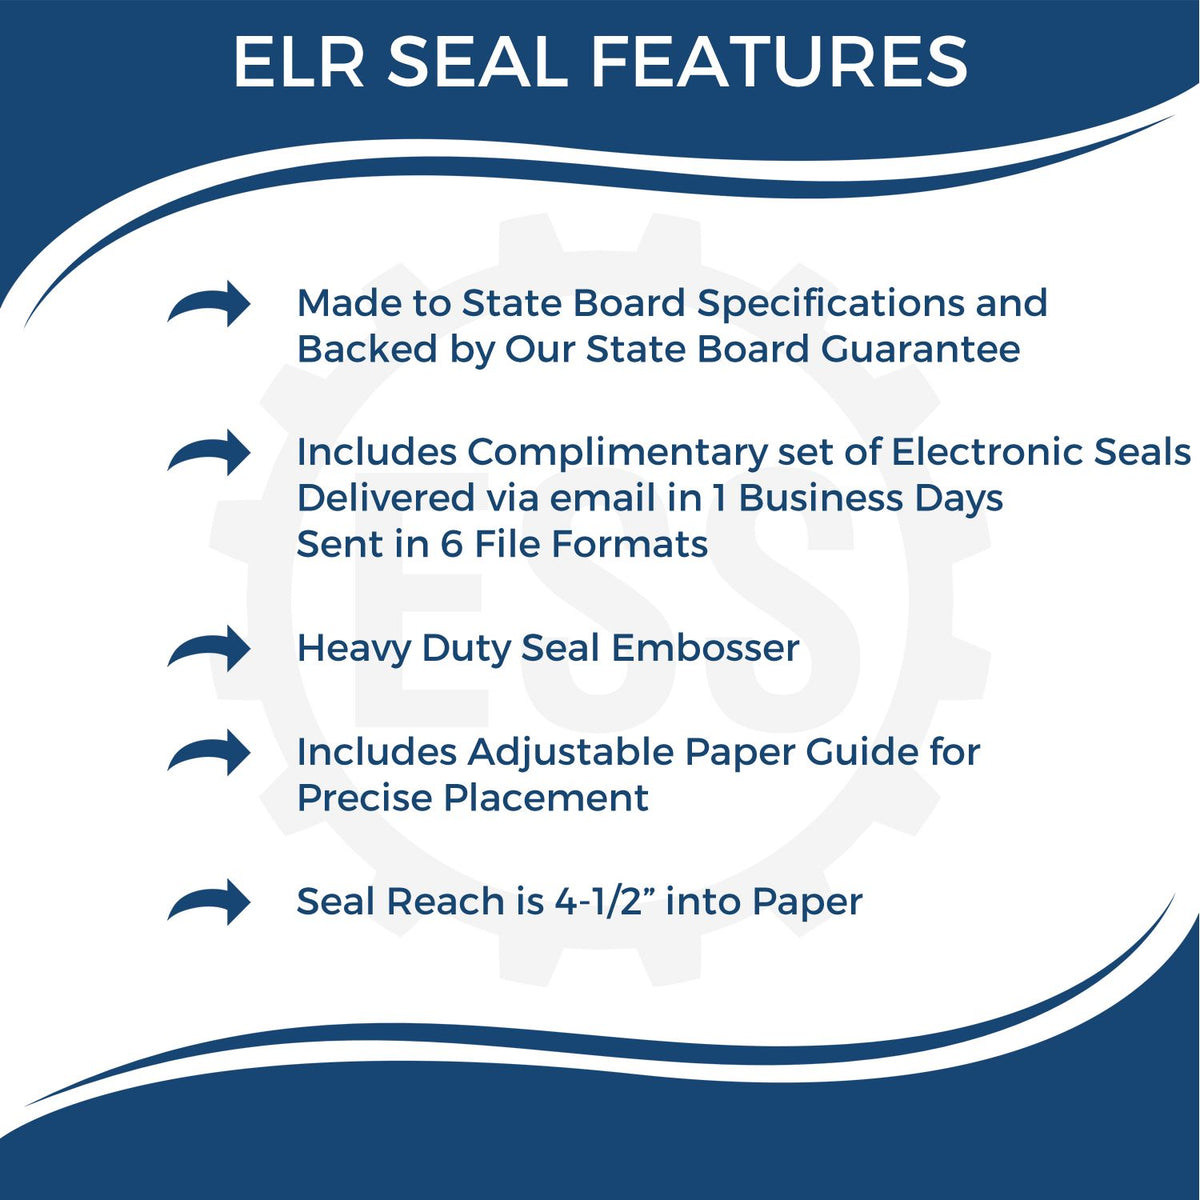 A picture of an infographic highlighting the selling points for the State of Florida Extended Long Reach Engineer Seal